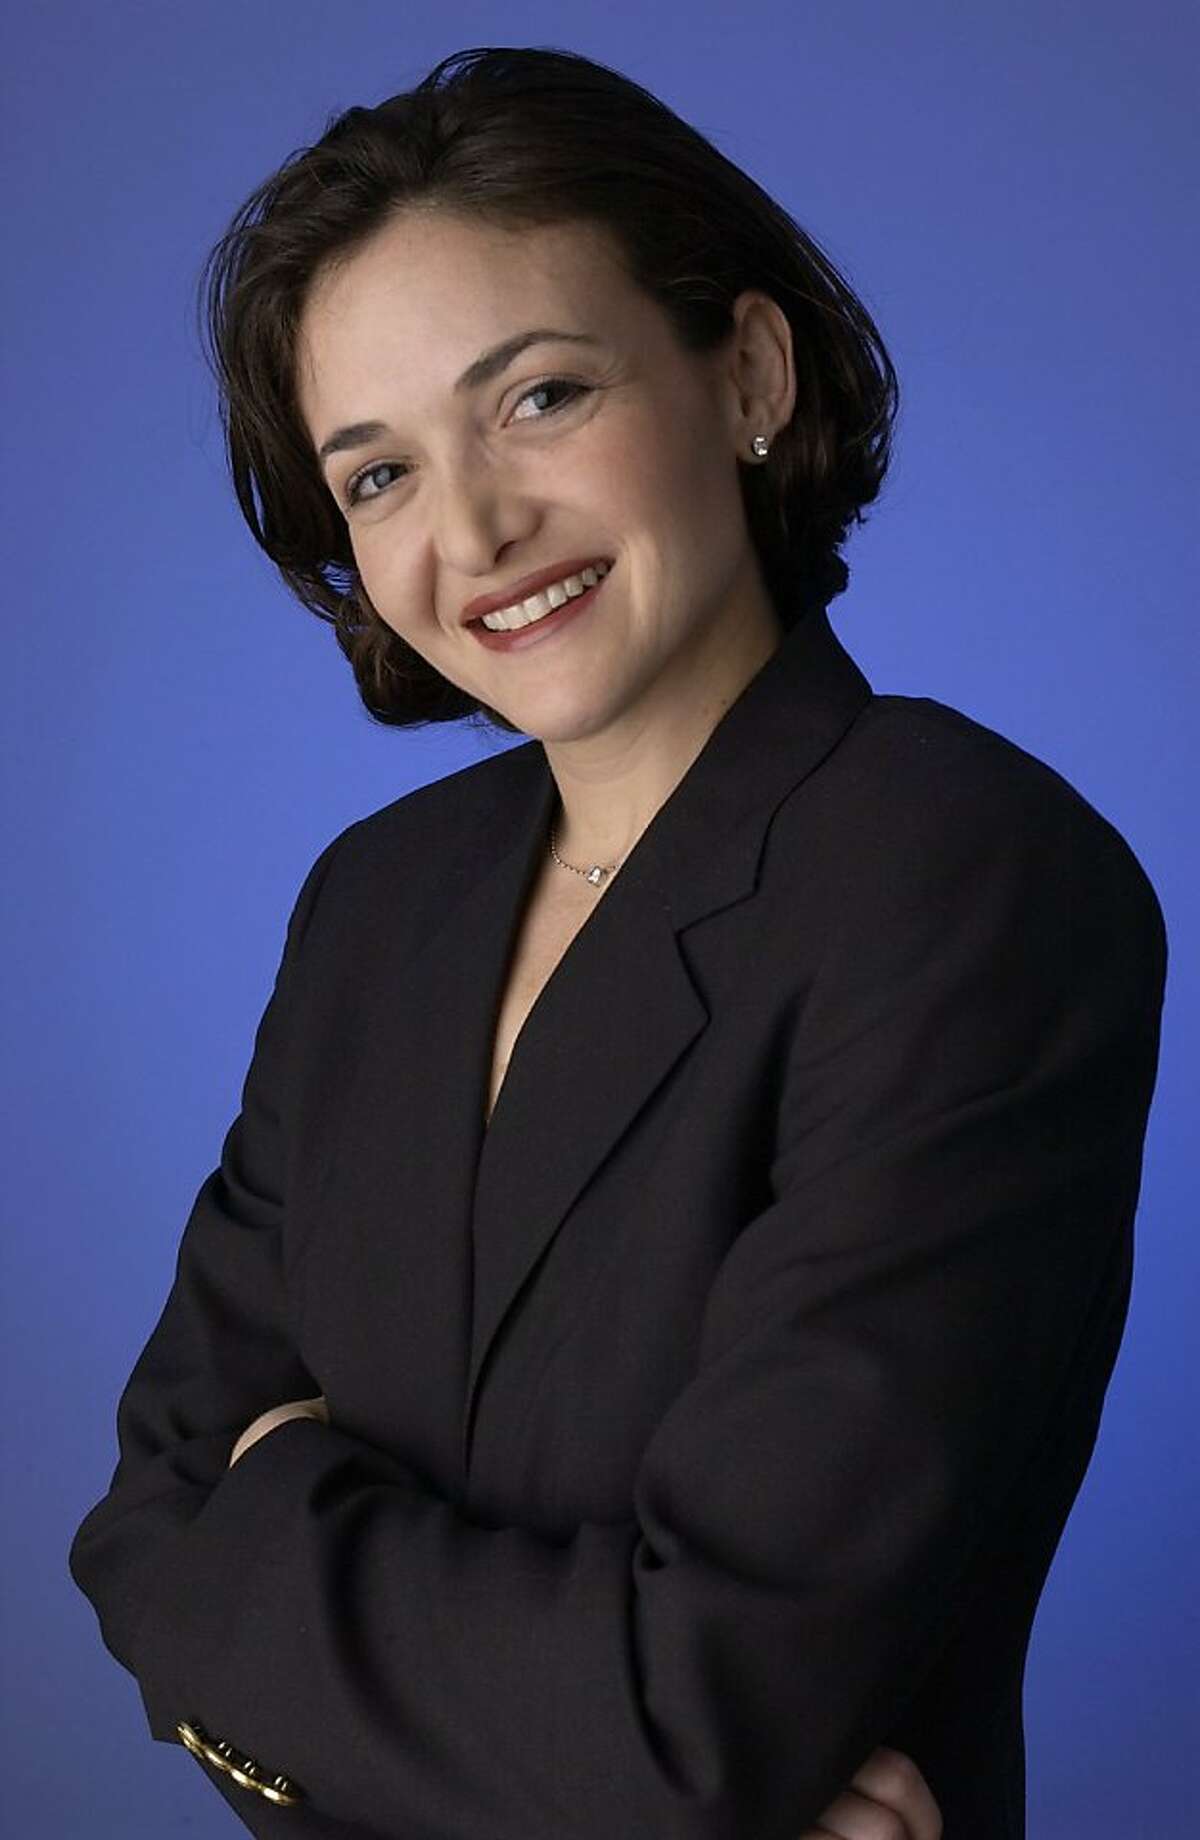 This undated photo provided by Google shows former Google executive Sheryl Sandberg. Facebook Inc. has raided Google Inc. to hire a new chief operating officer, providing the popular online social network with more seasoned management and advertising savvy as it strives to make more money without alienating its audience. Sandberg's defection from Google, announced Tuesday March 4, 2008, represents a coup for Facebook just three months after it suffered a humiliating setback in its effort to inject more commercialism into its Web site. (AP Photo/Google) ** NO SALES ** Ran on: 03-05-2008 Sheryl Sandberg will become chief operating officer of the popular social-networking site.